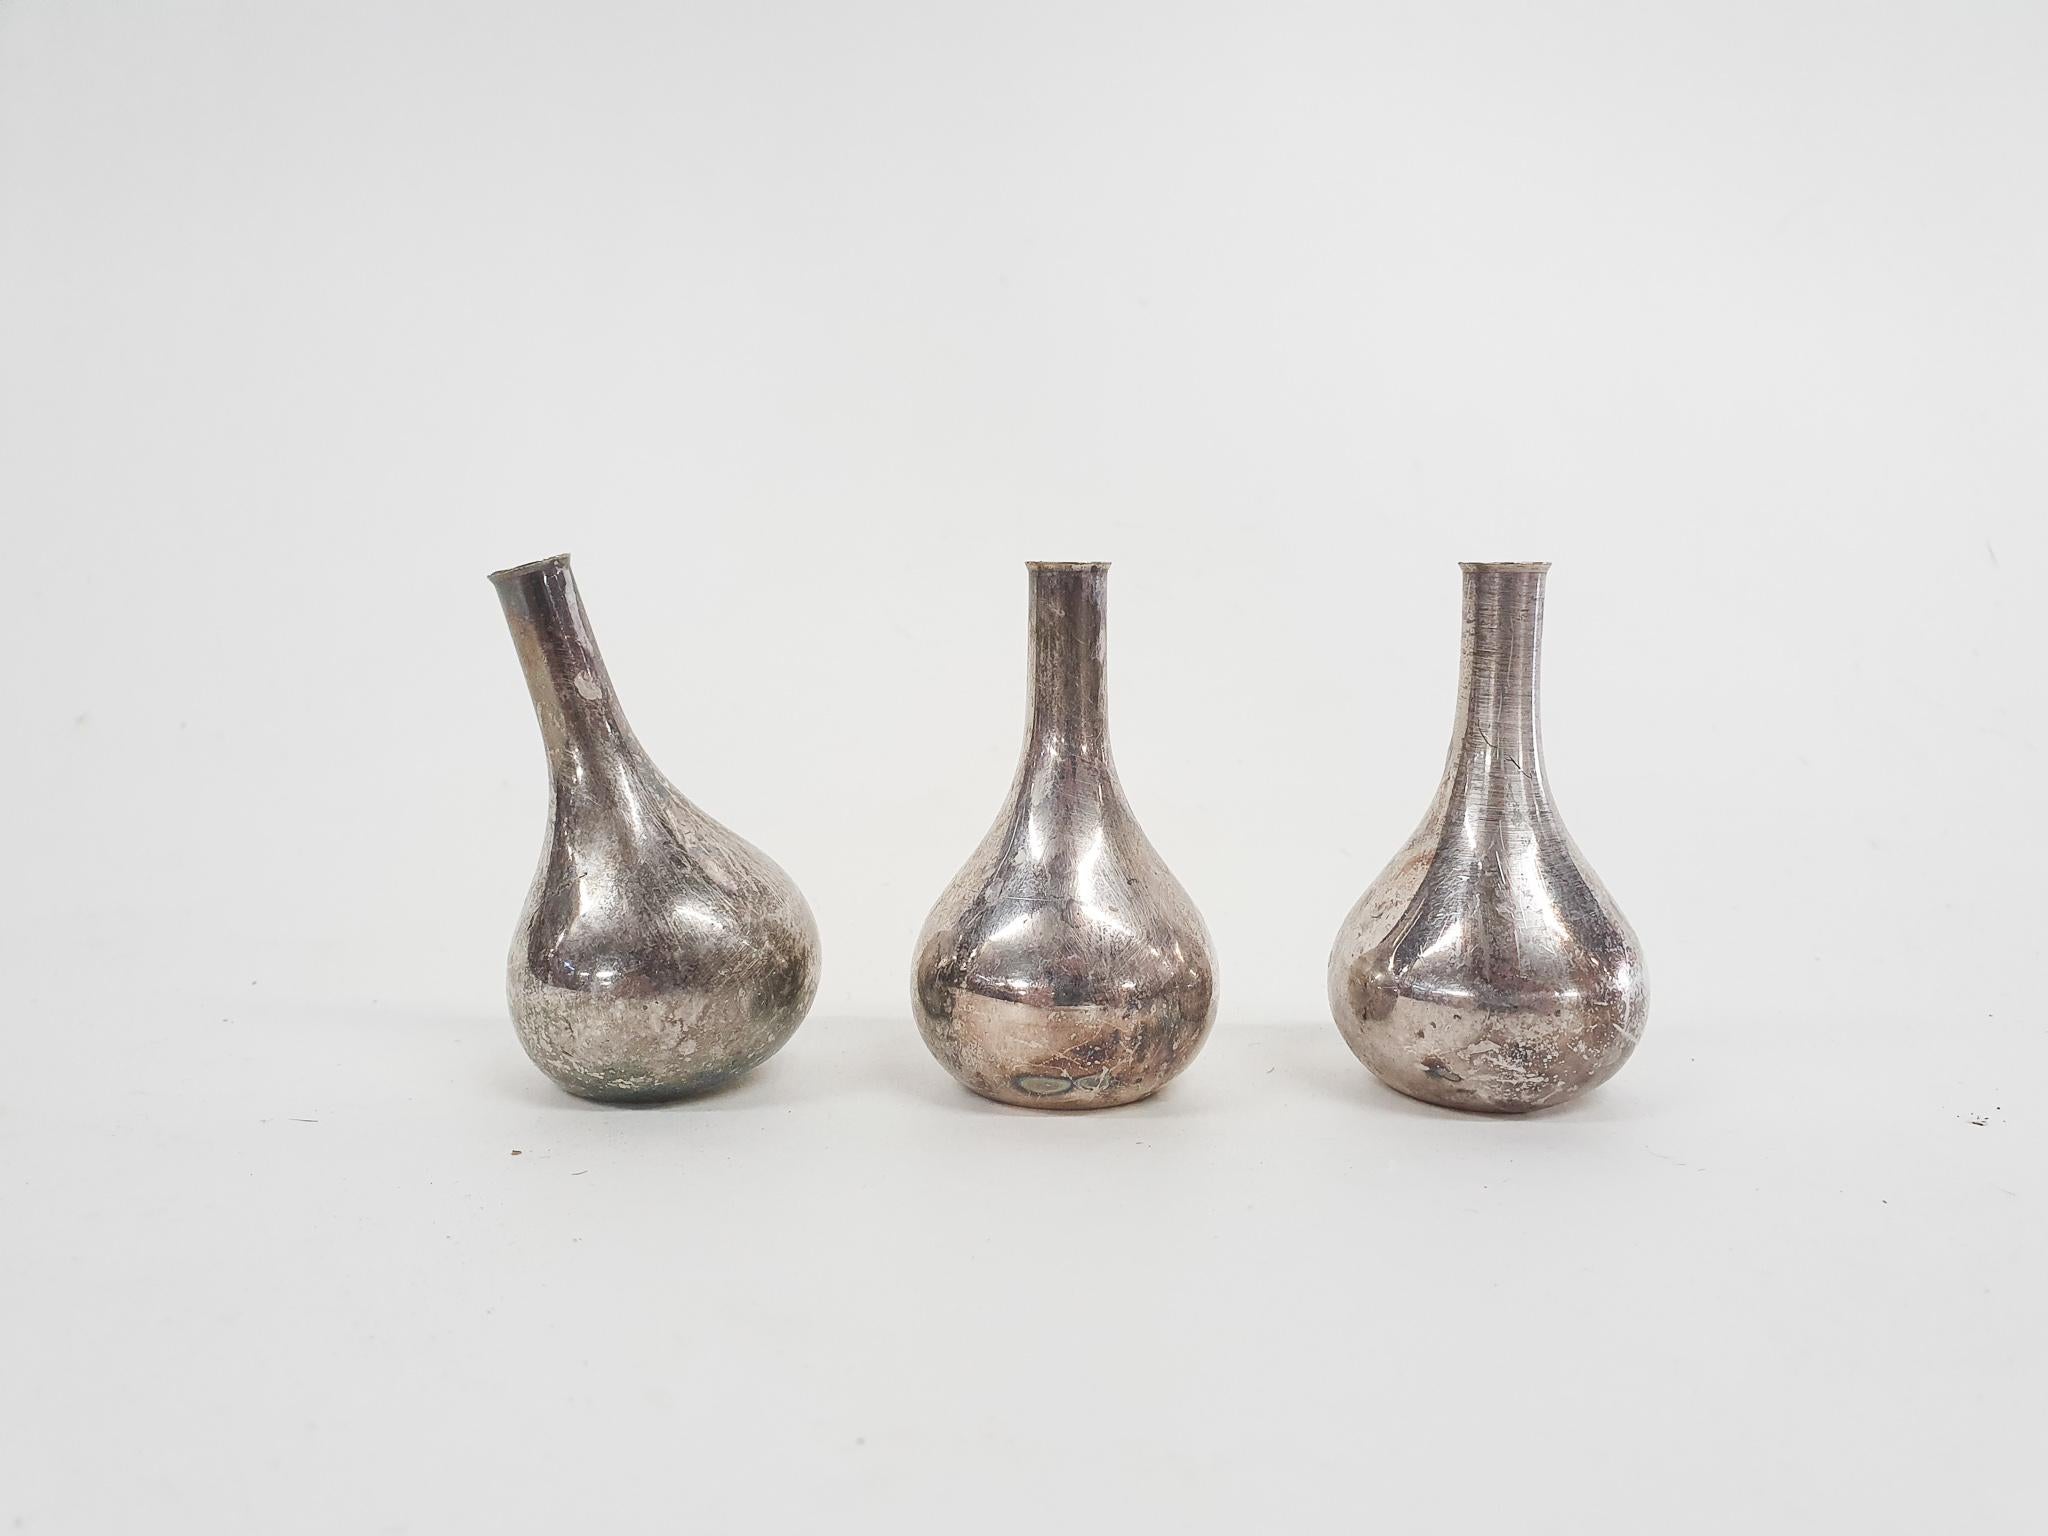 Three small silver candle holders designed by Jens H. Quistgaard for Dansk Design. 2 have a straight neck, one has a slope neck.
Marked at the bottom